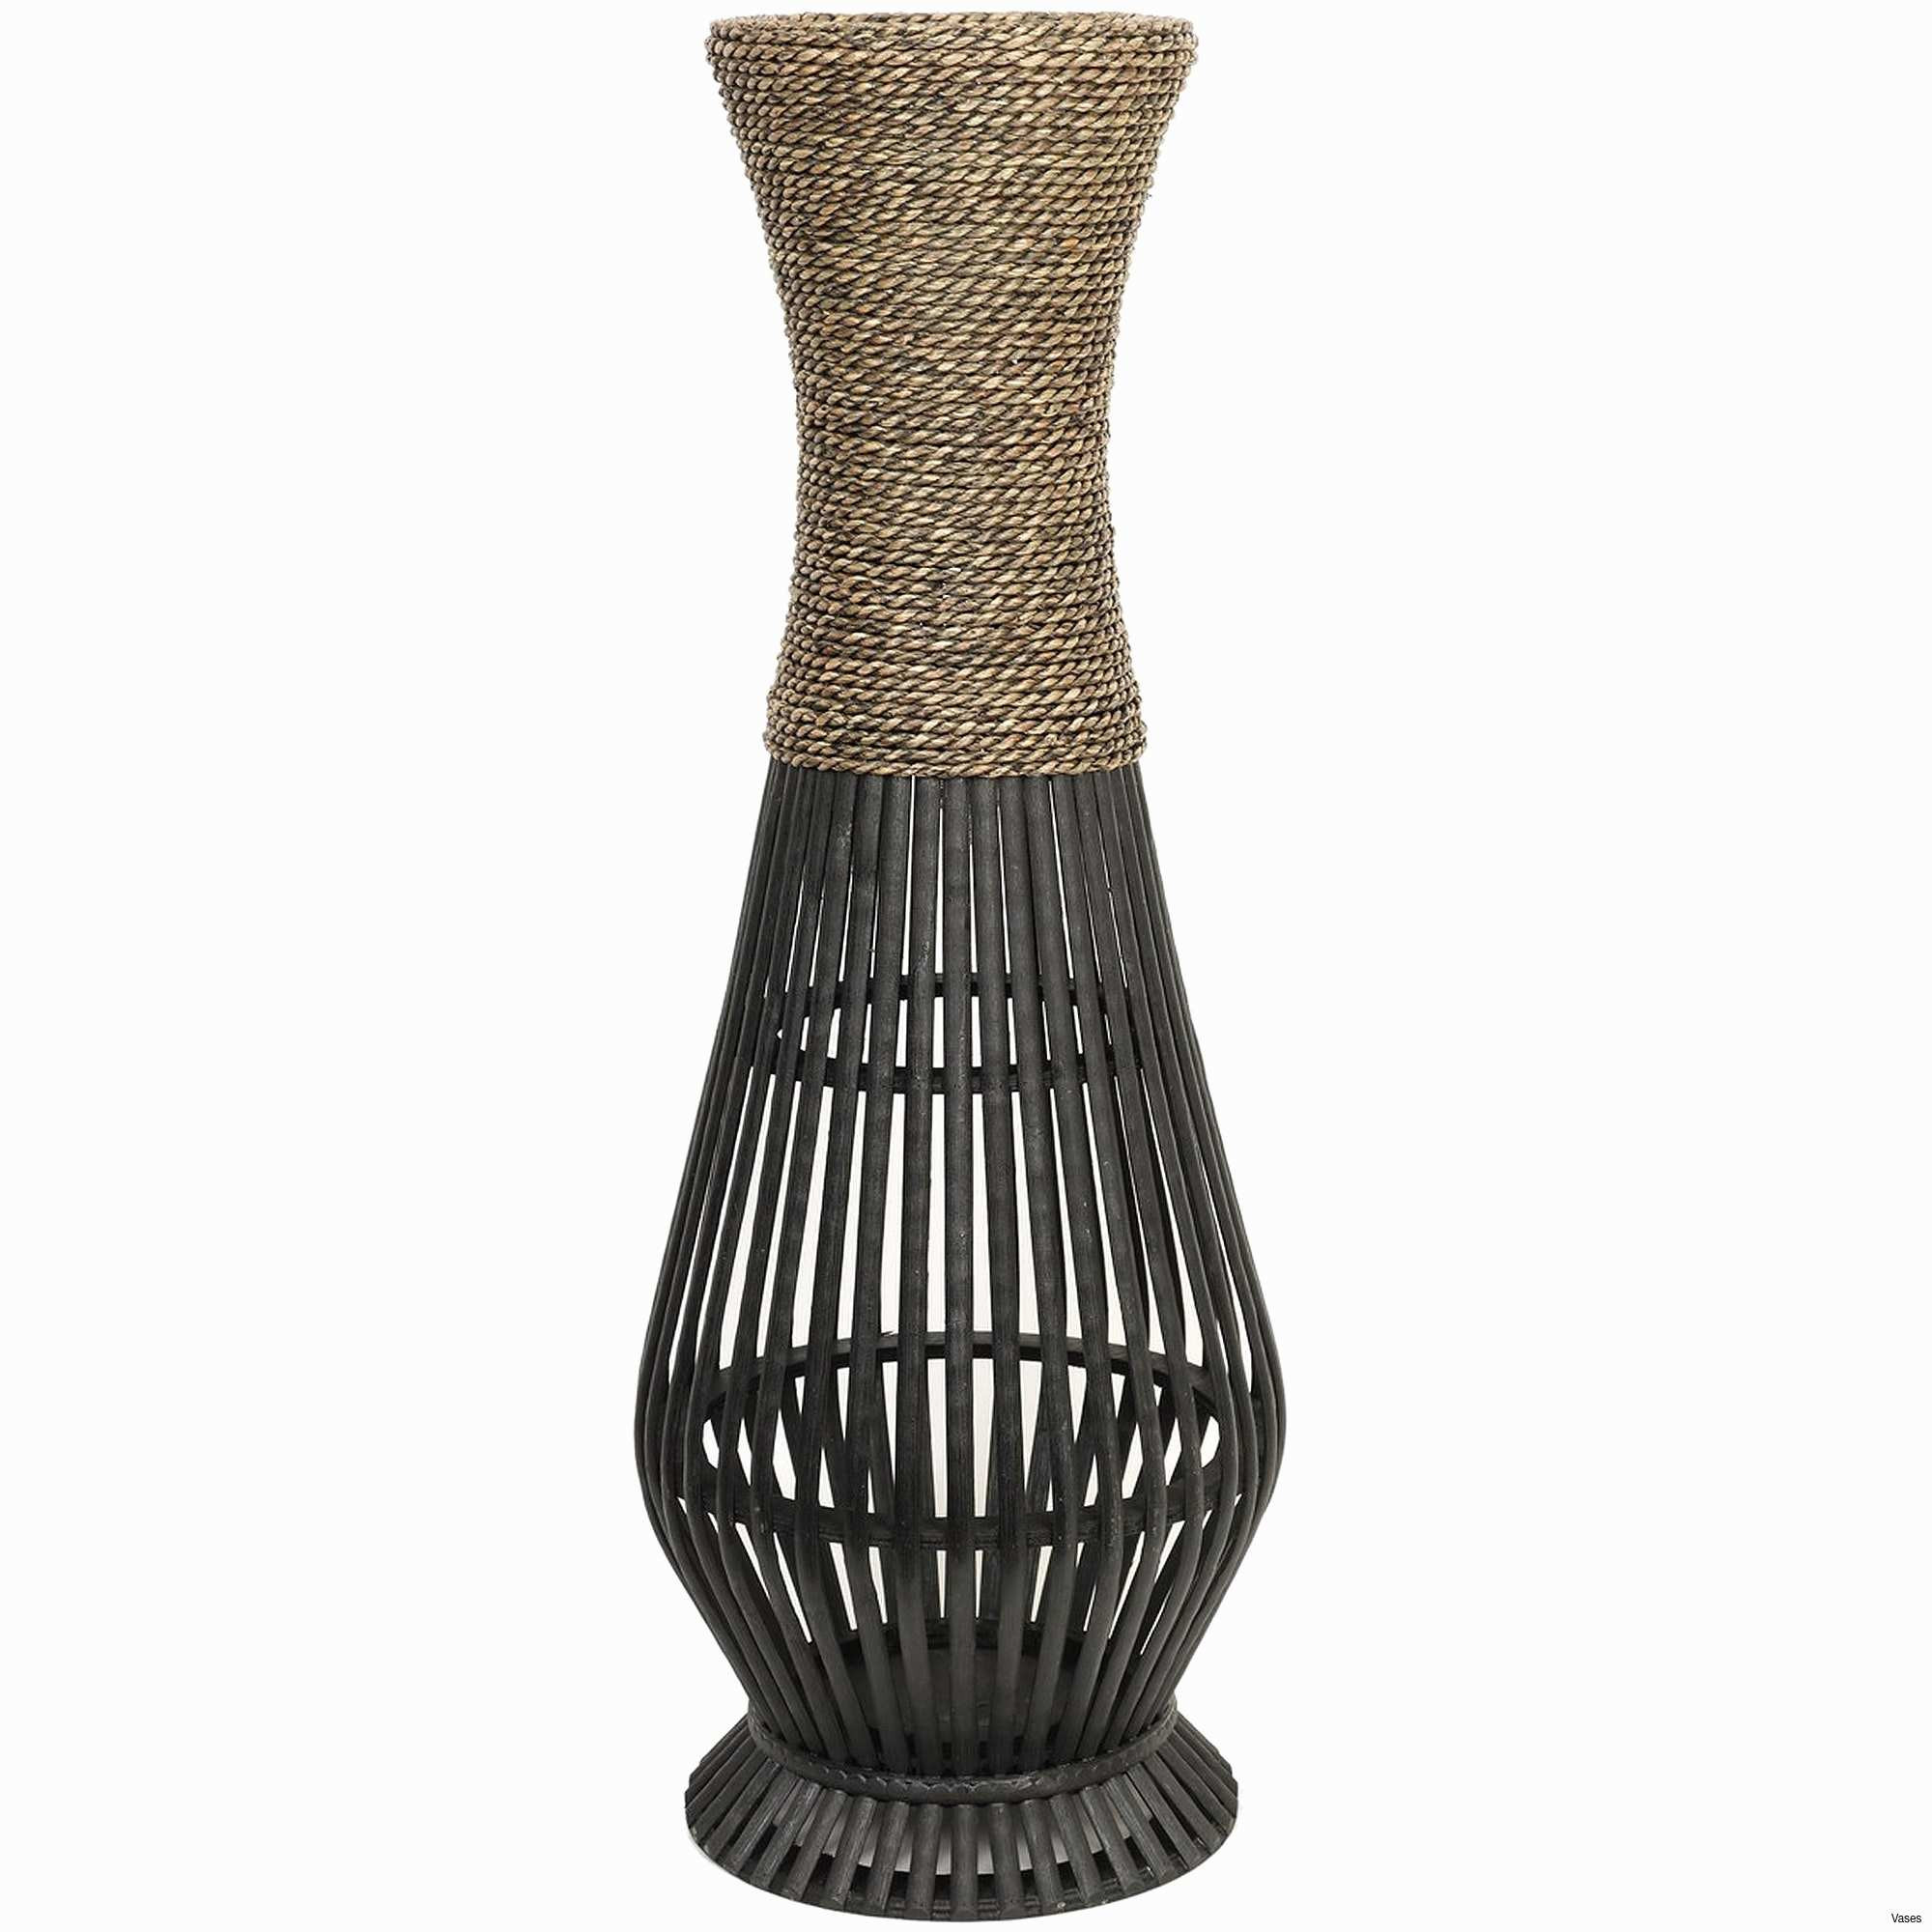 22 Unique Large Mosaic Vase 2024 free download large mosaic vase of tall wood floor vase collection wooden home decor lovely d dkbrw for tall wood floor vase collection wooden home decor lovely d dkbrw 5743 1h vases tall wood vase i 0d